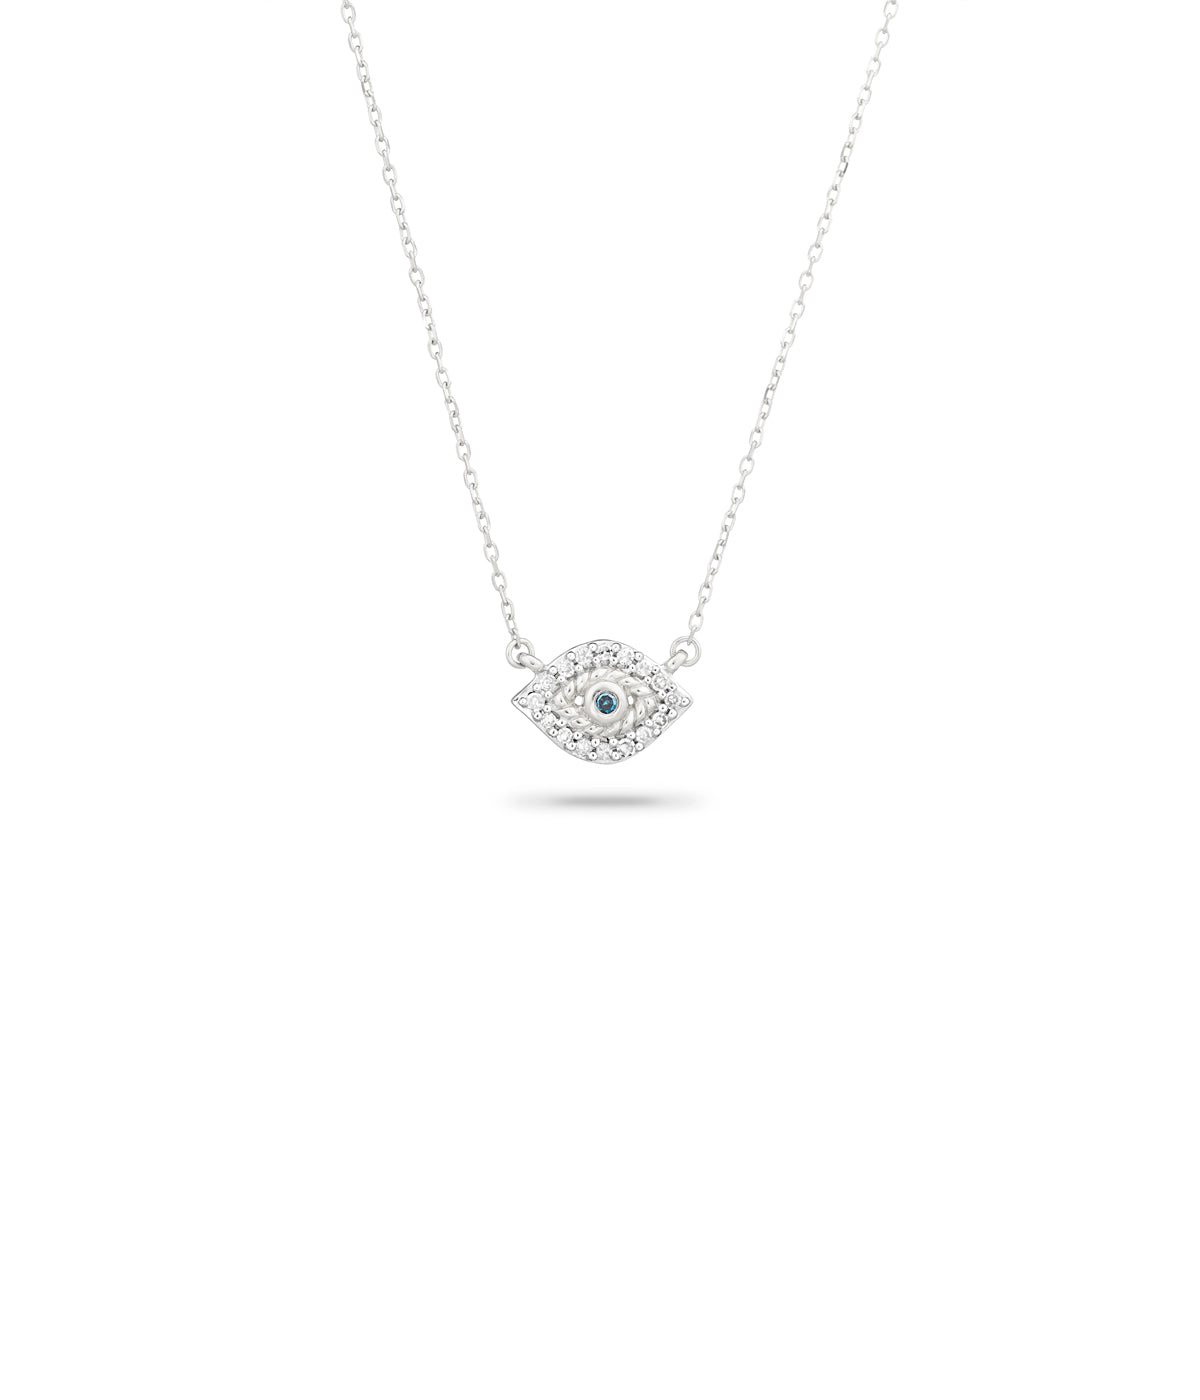 Super Tiny Pave Evil Eye Necklace in Silver